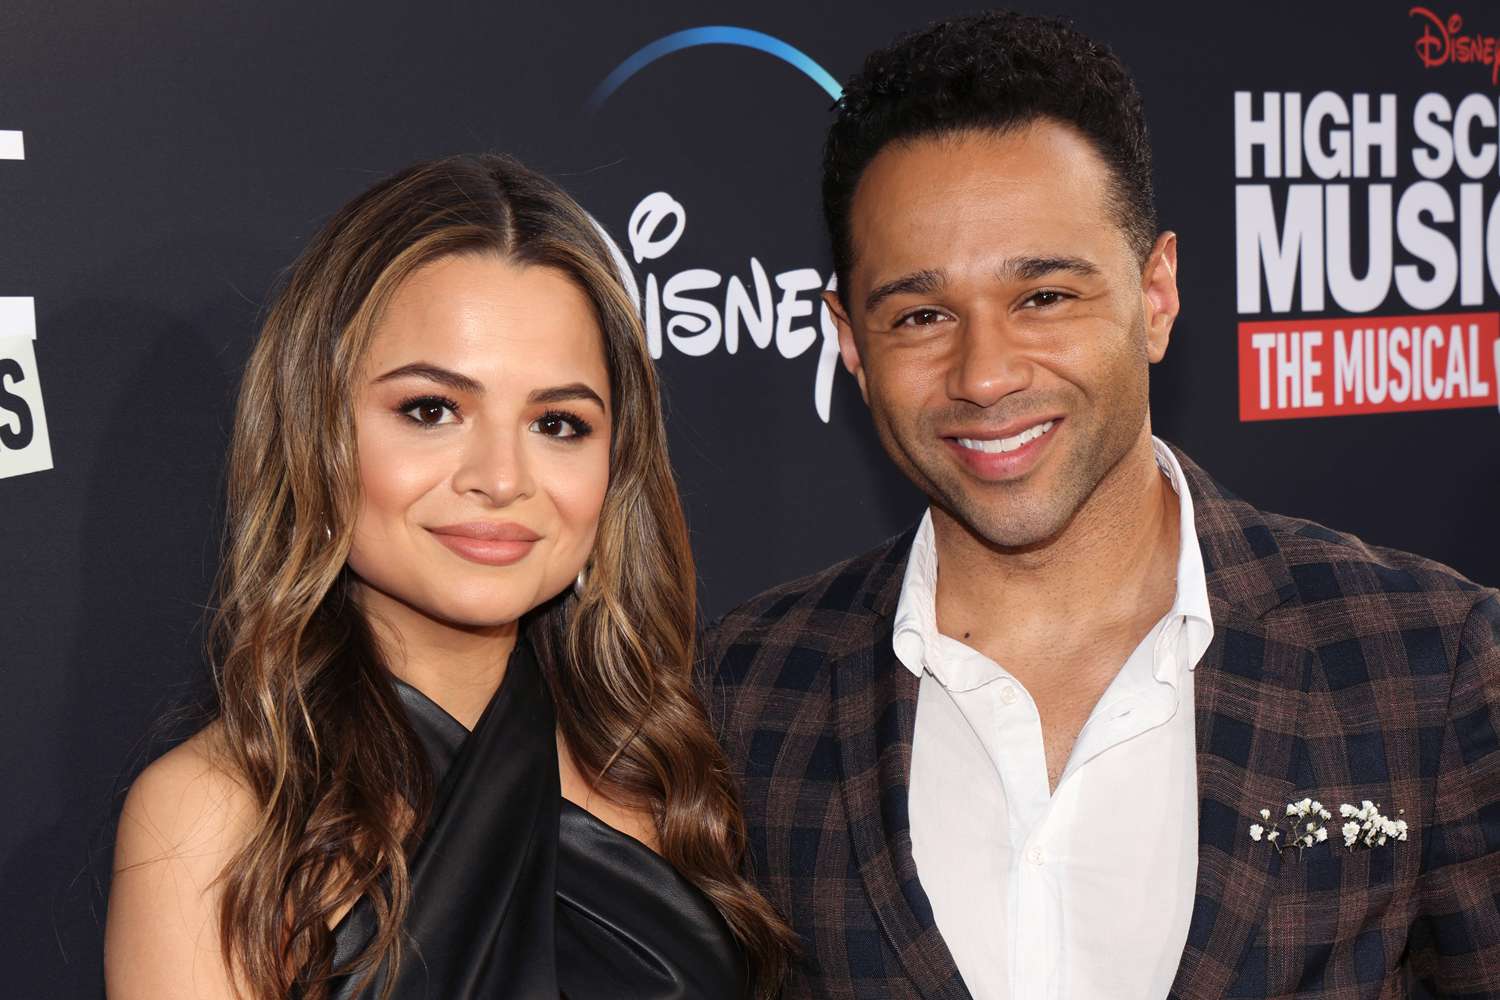 Corbin Bleu Reveals the Moment 'Everything Went Blurry' While Looking Back on Wedding with Sasha Clements (Exclusive)